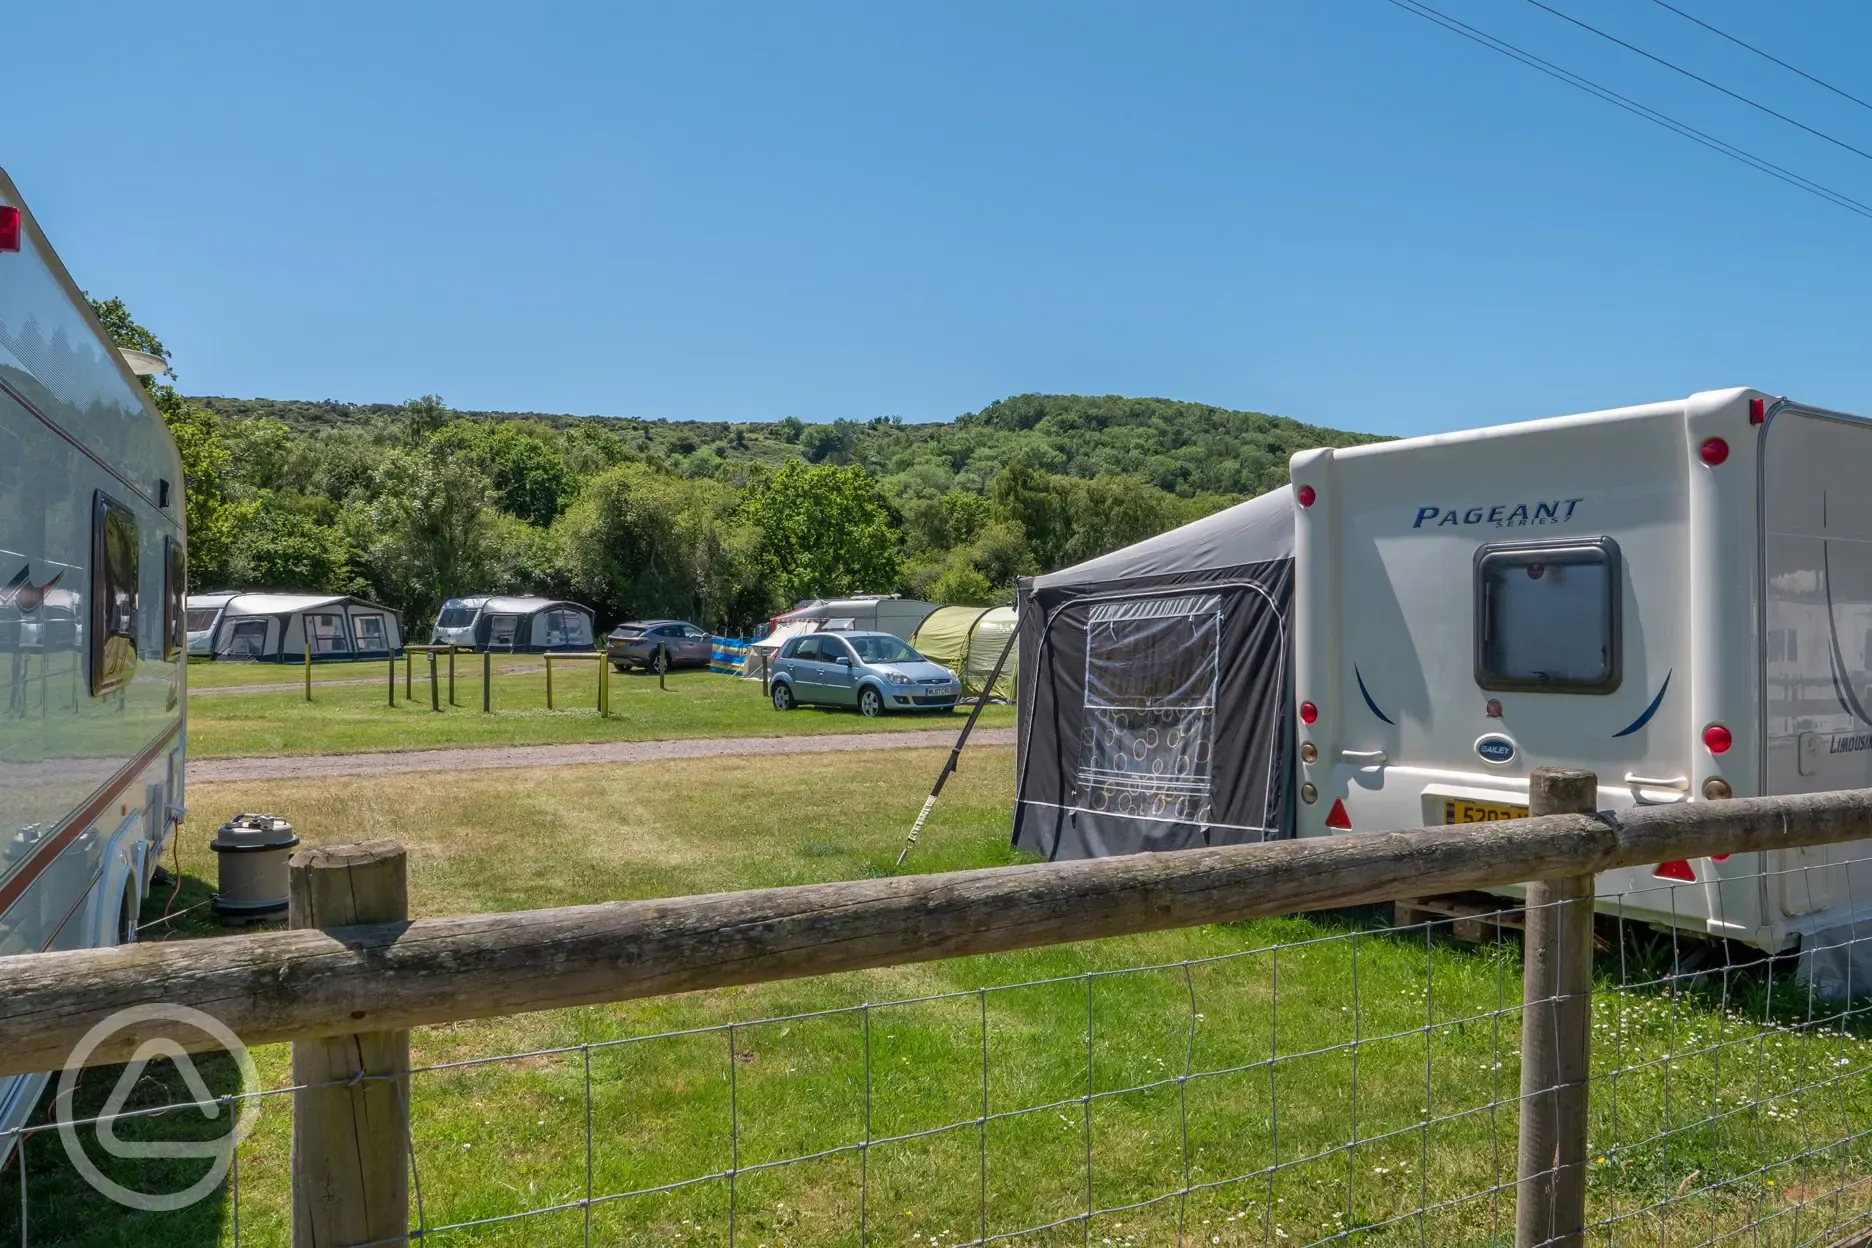 Grass pitches with woodland view